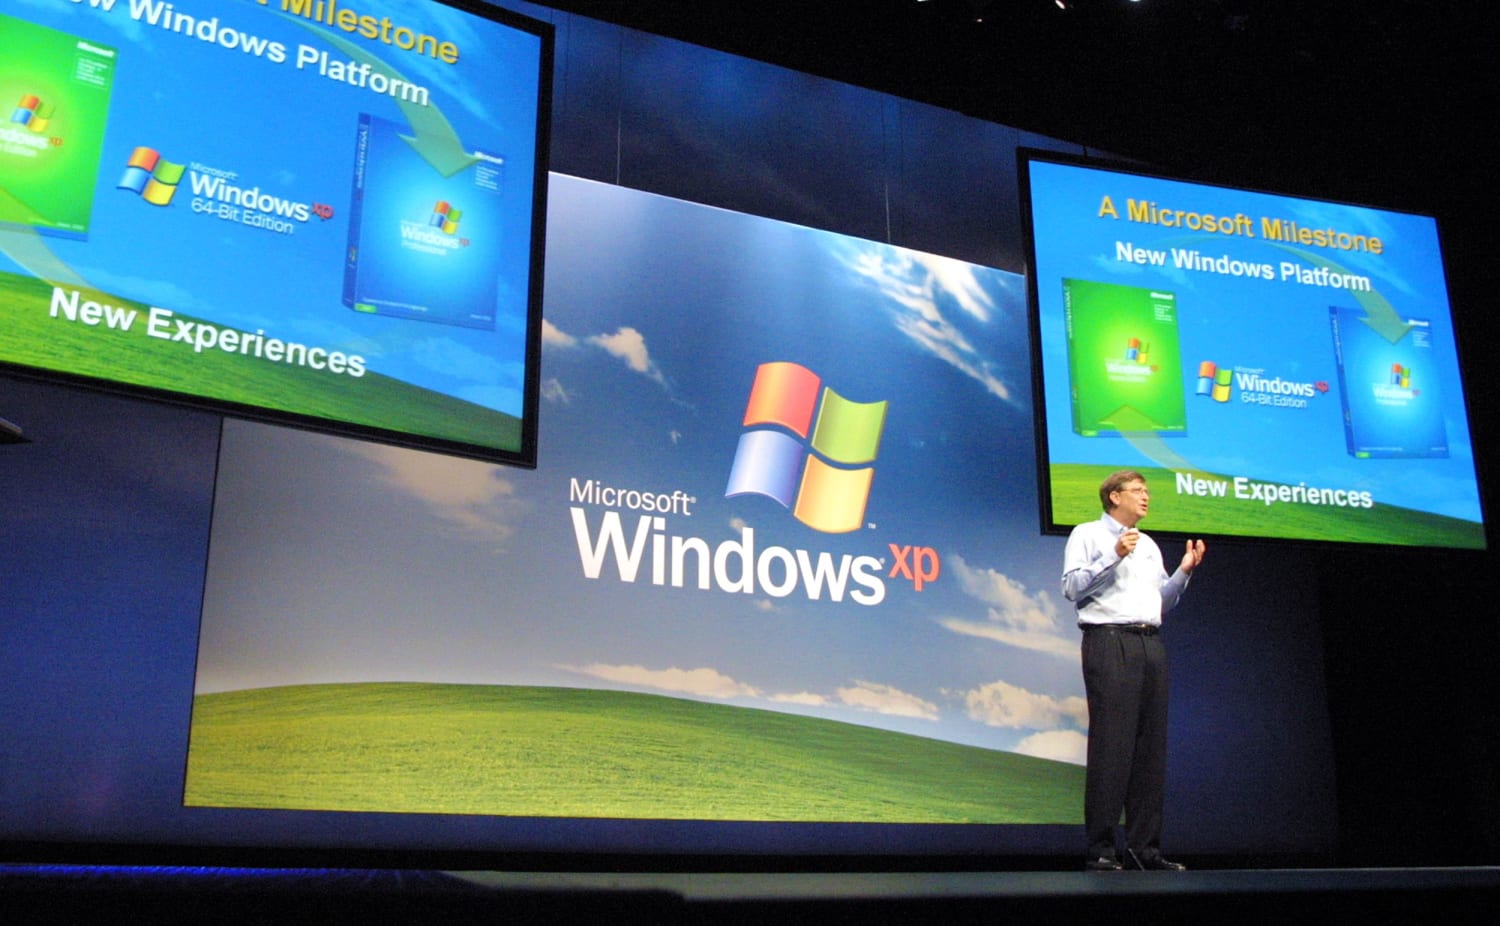 Windows XP is Dead: Not Every Company Got the Memo